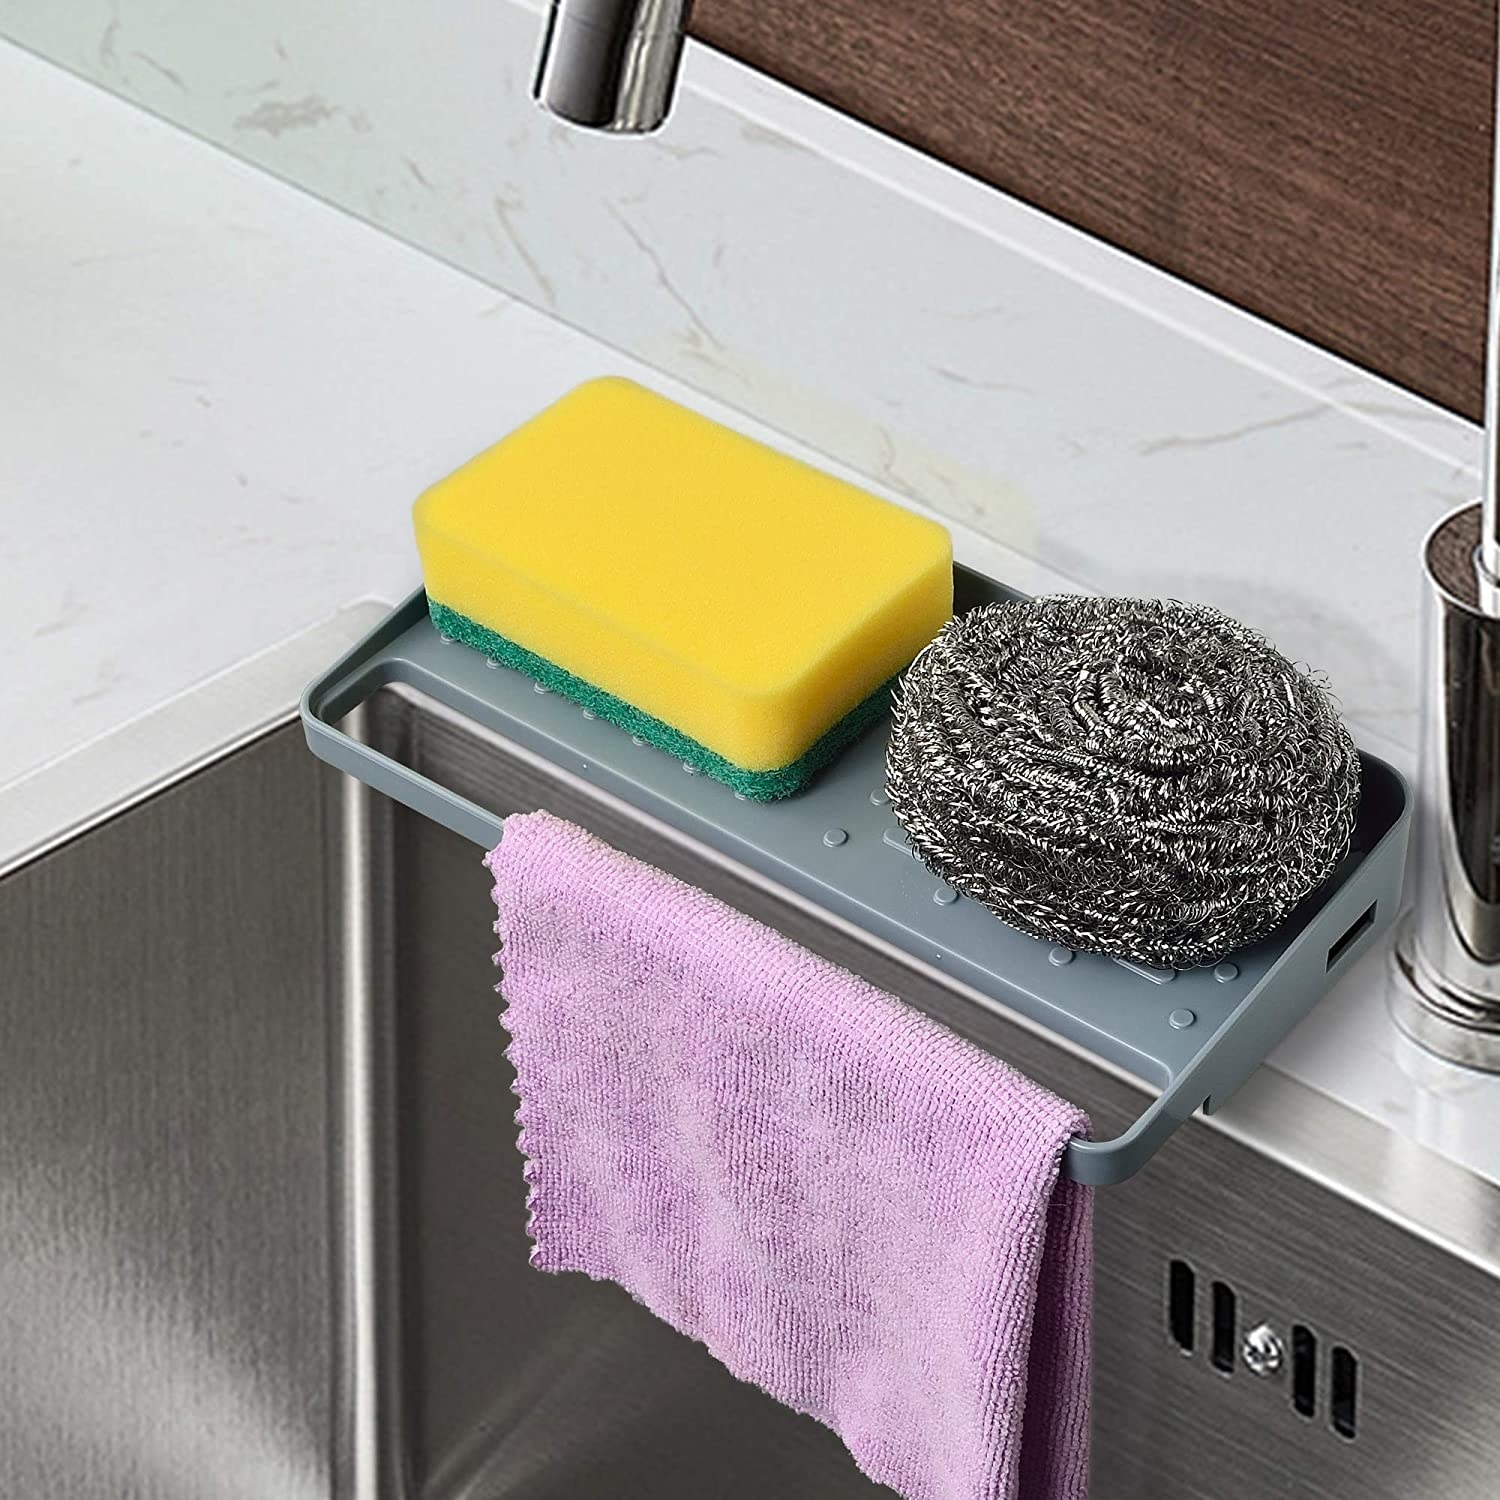 Two sponges and a dishrag on the organizer